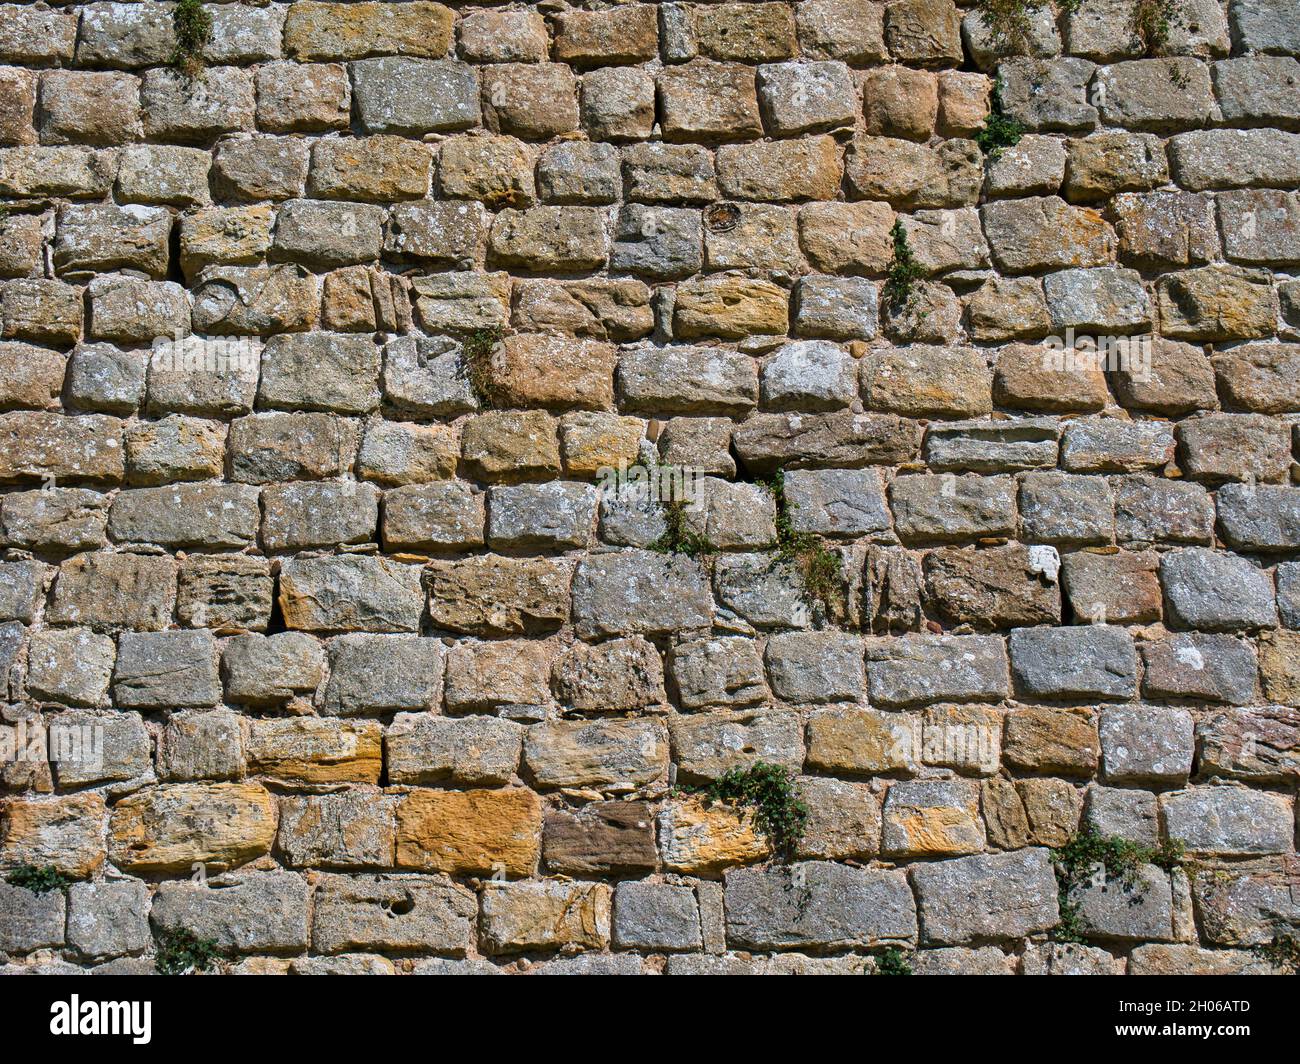 Rows of old stone blocks in an ancient wall. Taken on a sunny day Stock  Photo - Alamy